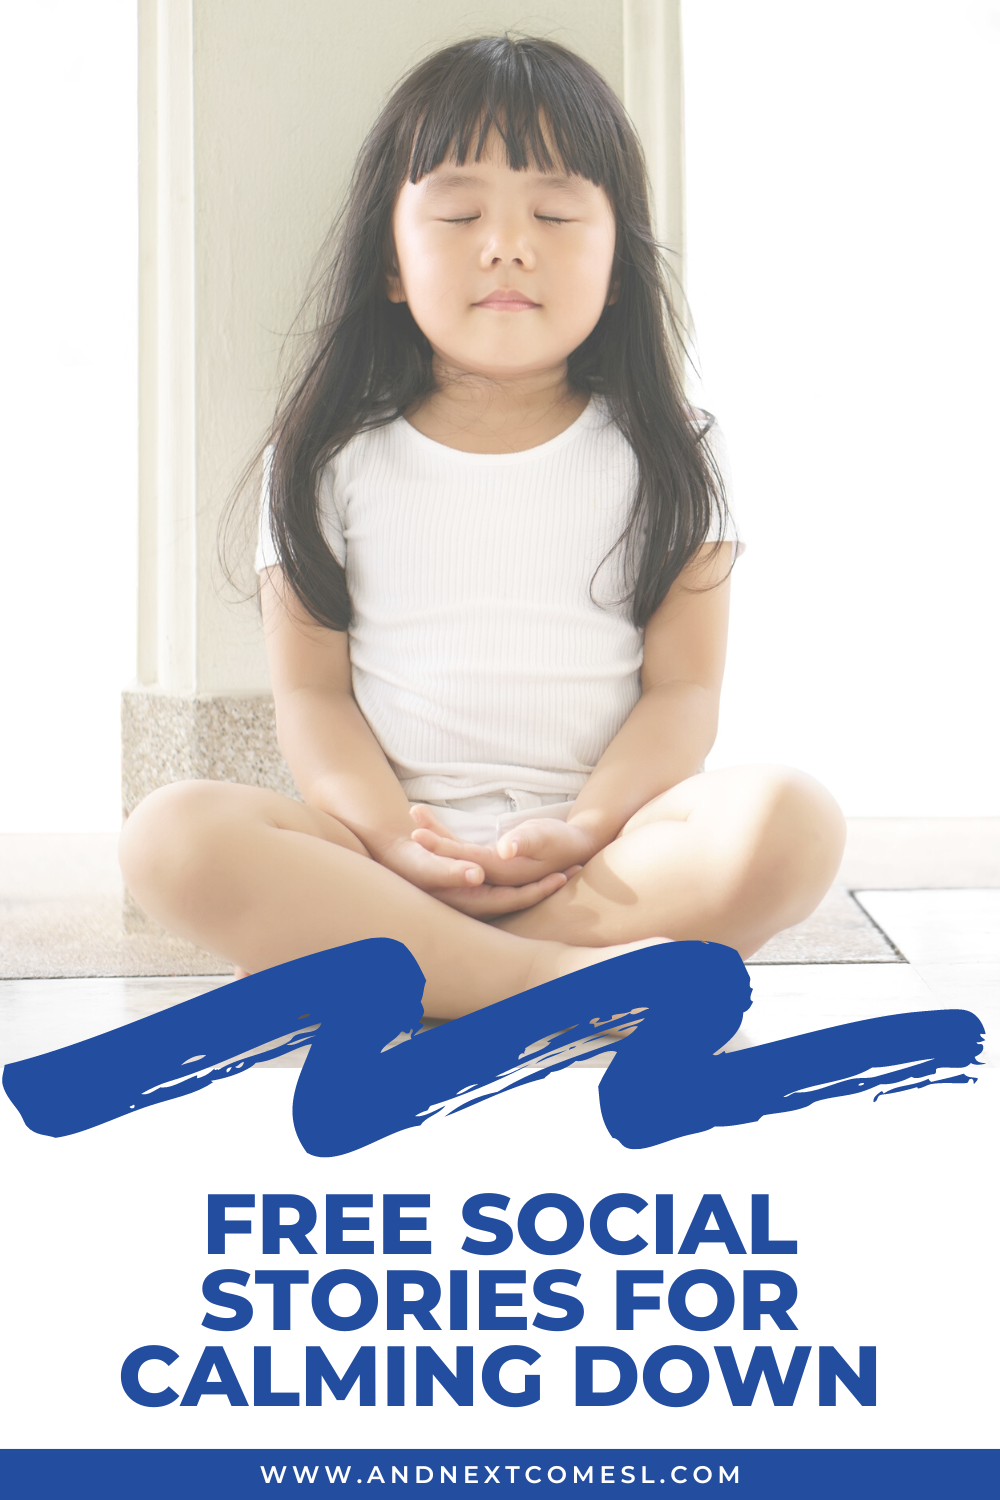 Free social stories for calming down, building self-regulation strategies, and teaching coping strategies